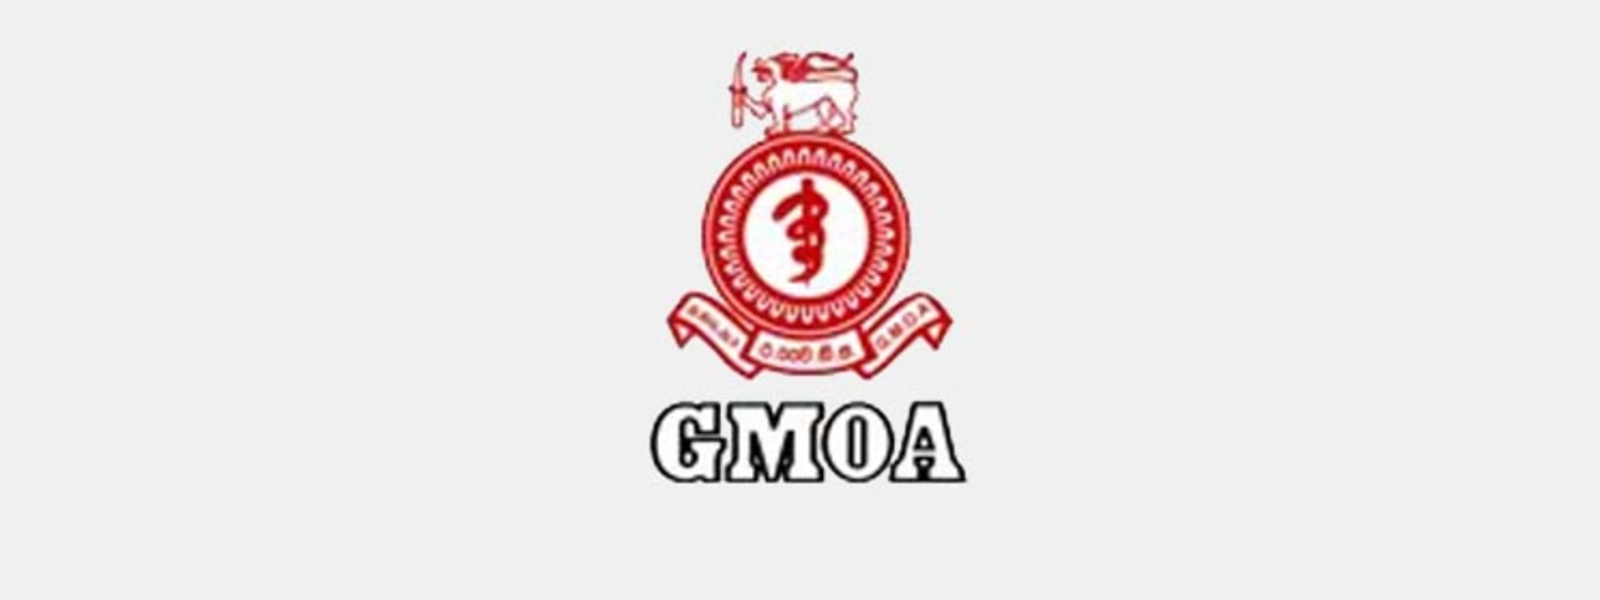 Technical Committee failure to meet, a reason for new COVID-19 cluster; GMOA